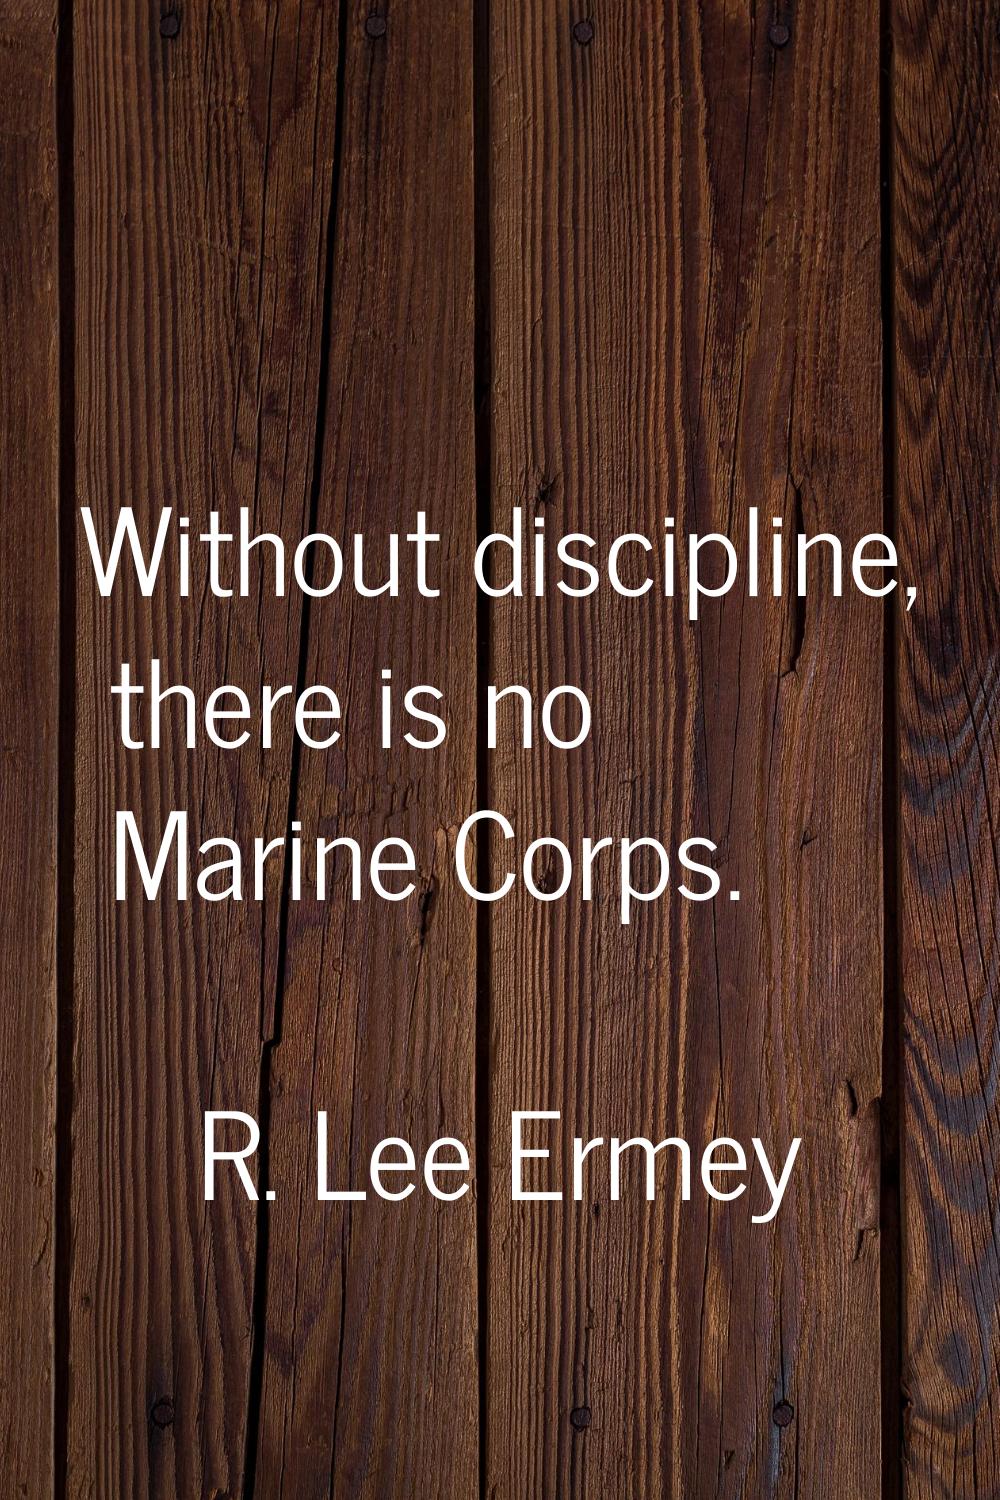 Without discipline, there is no Marine Corps.